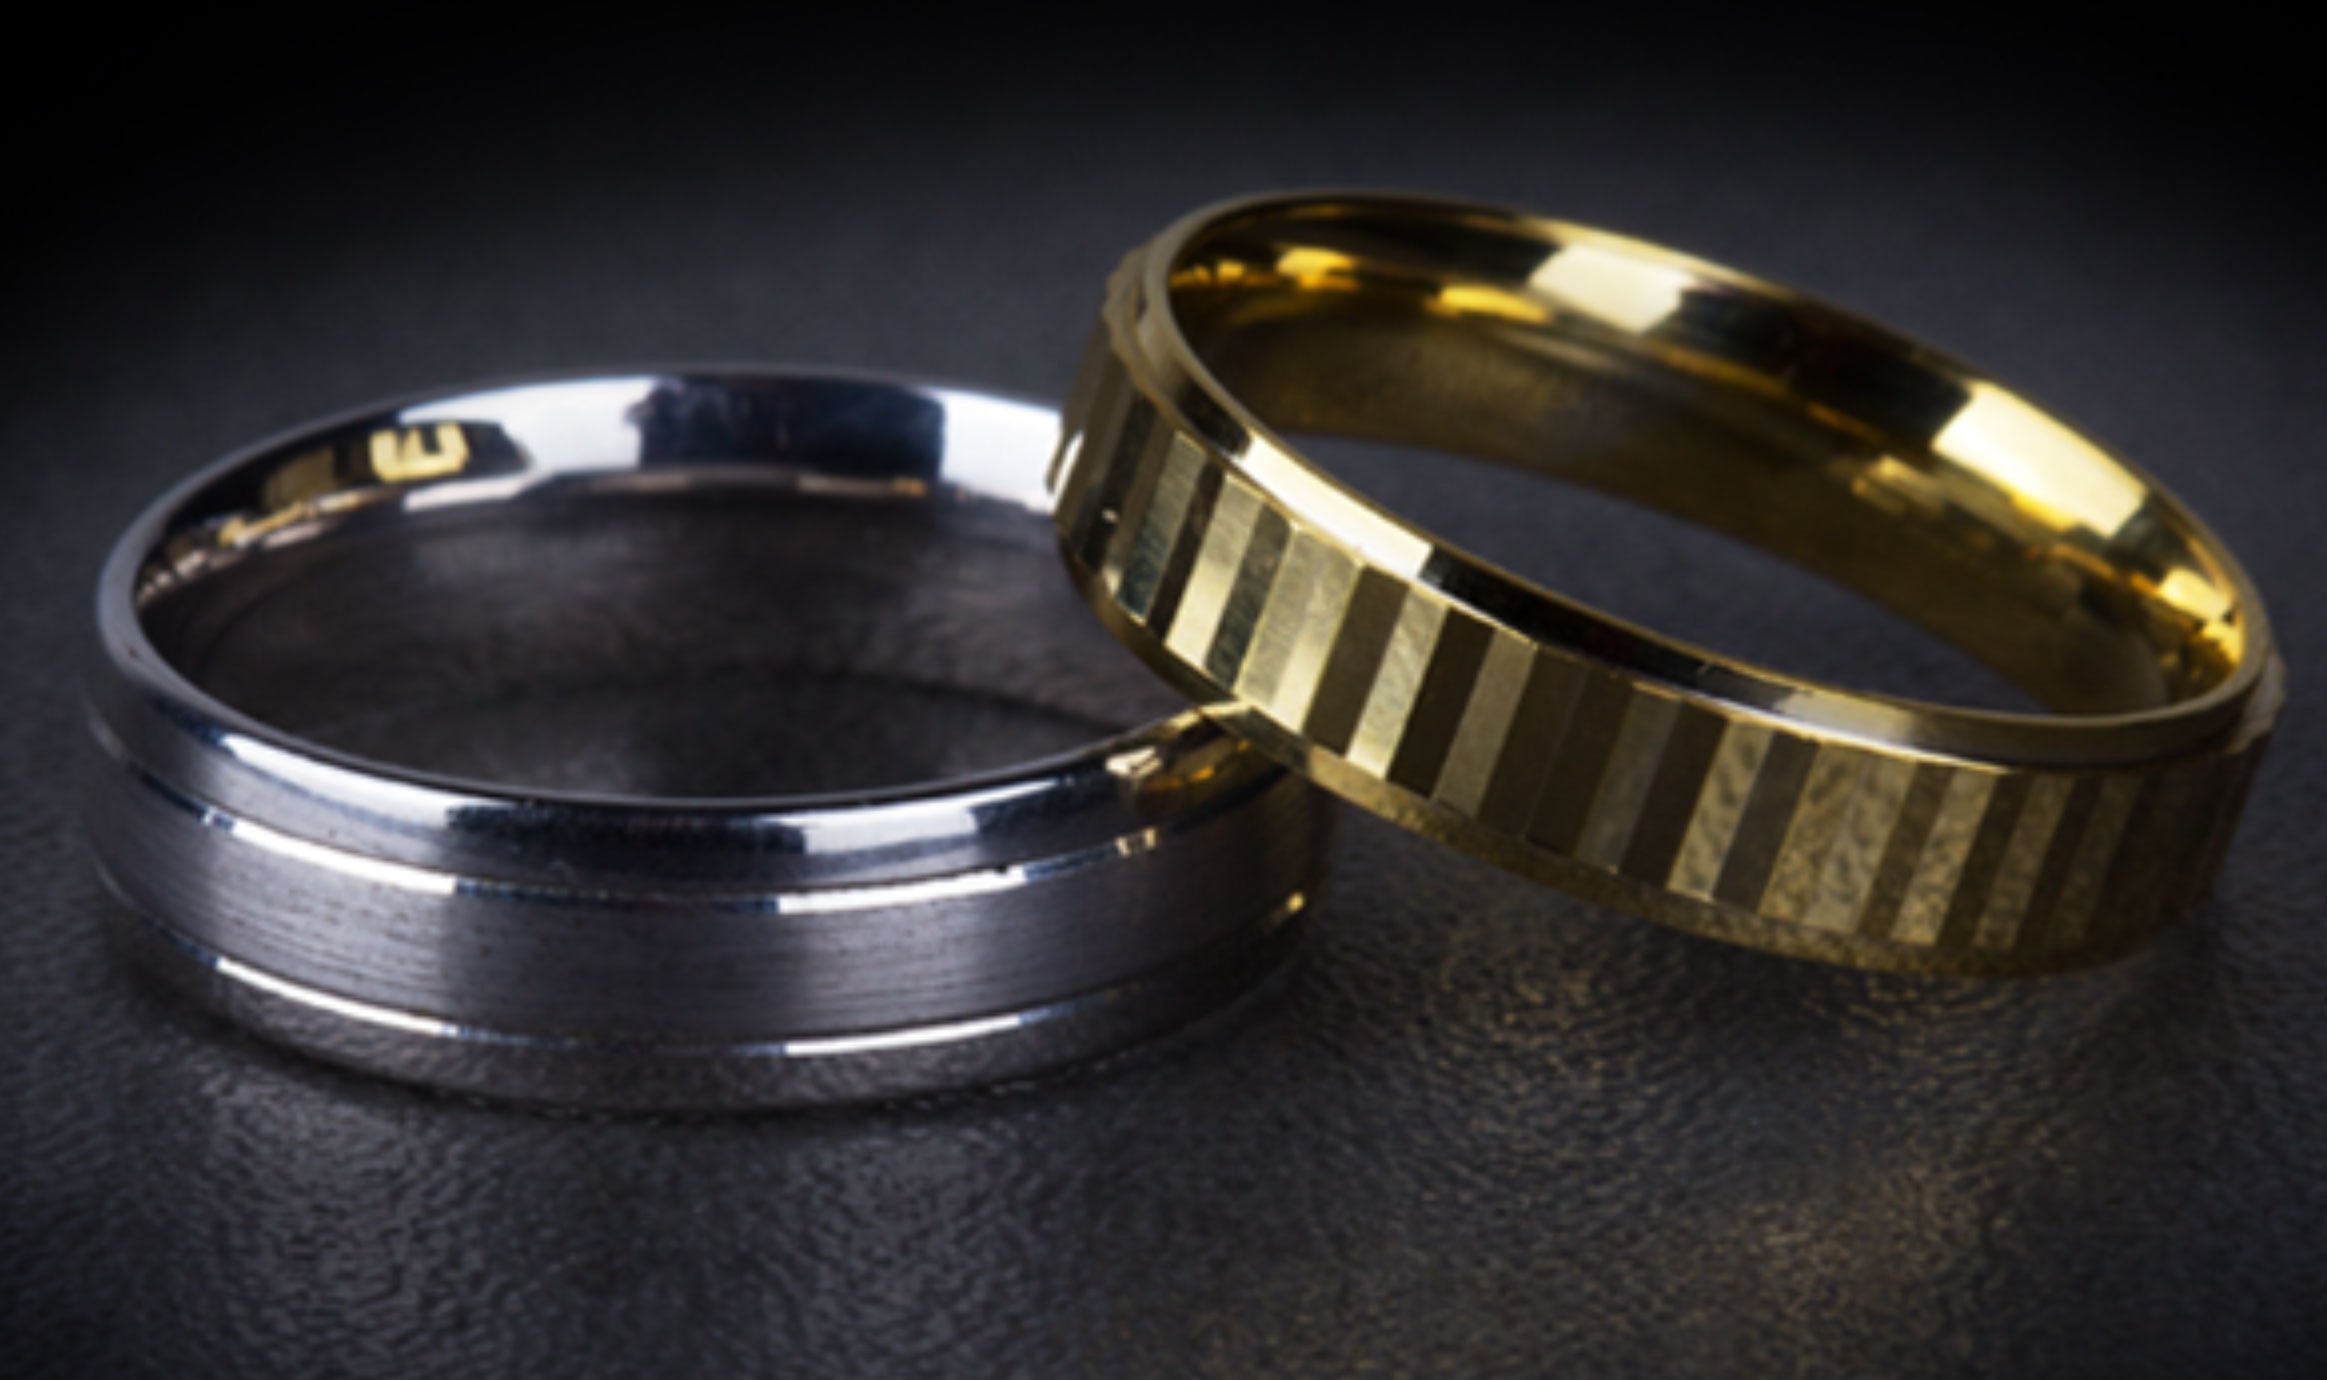 Men's Wedding Bands: Should You Choose Yellow Gold, White Gold or